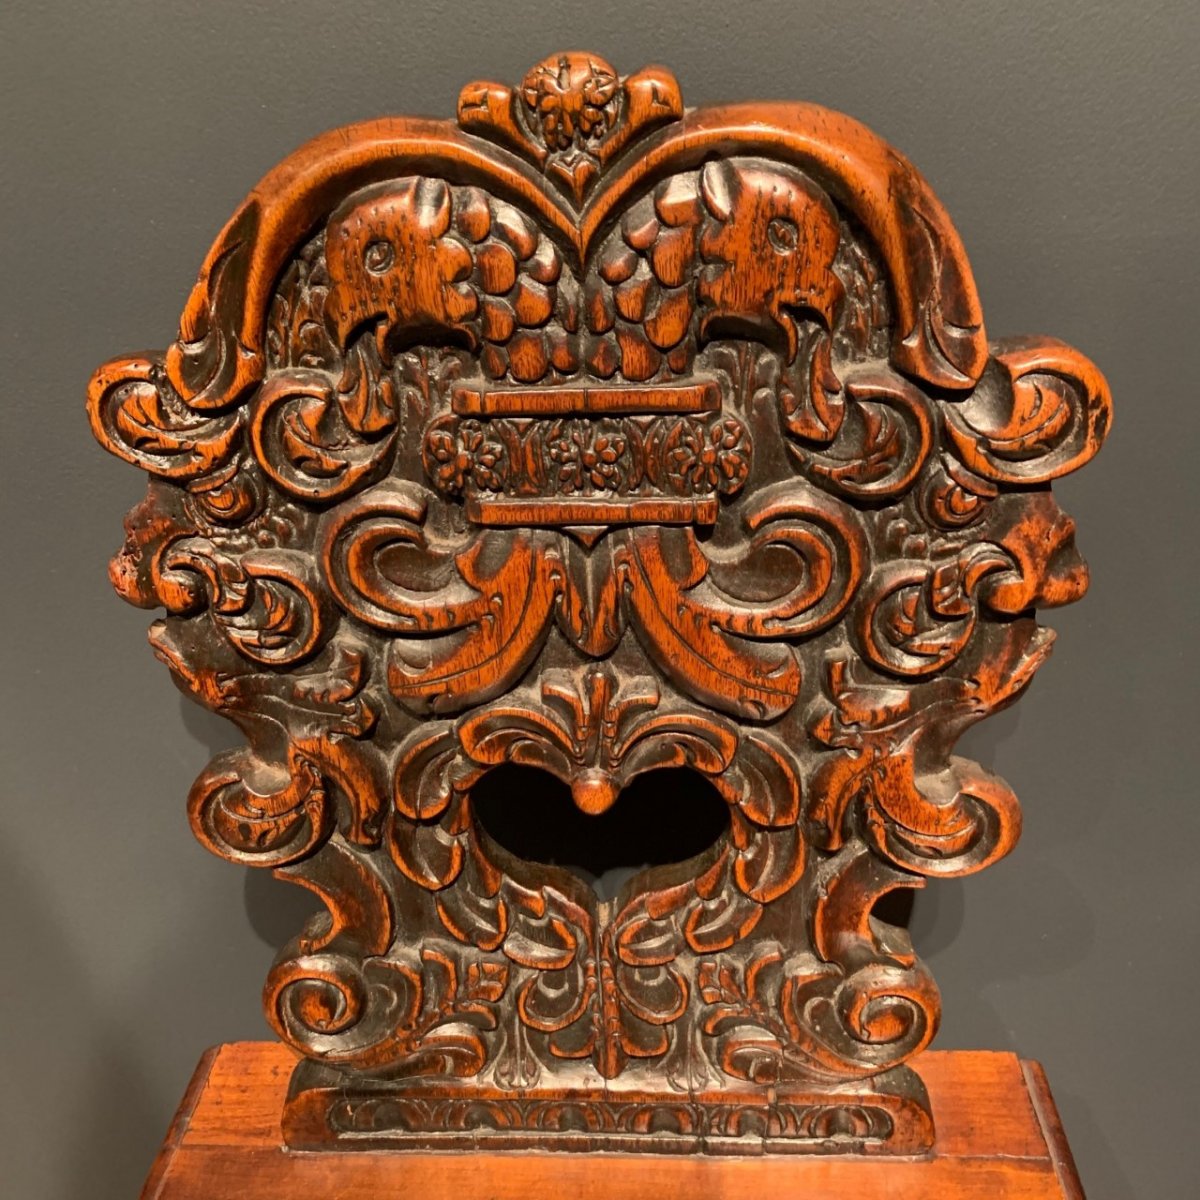 Alsatian Chair In Late 17th Century Walnut, Grotesque Decor And Eagle Heads-photo-2